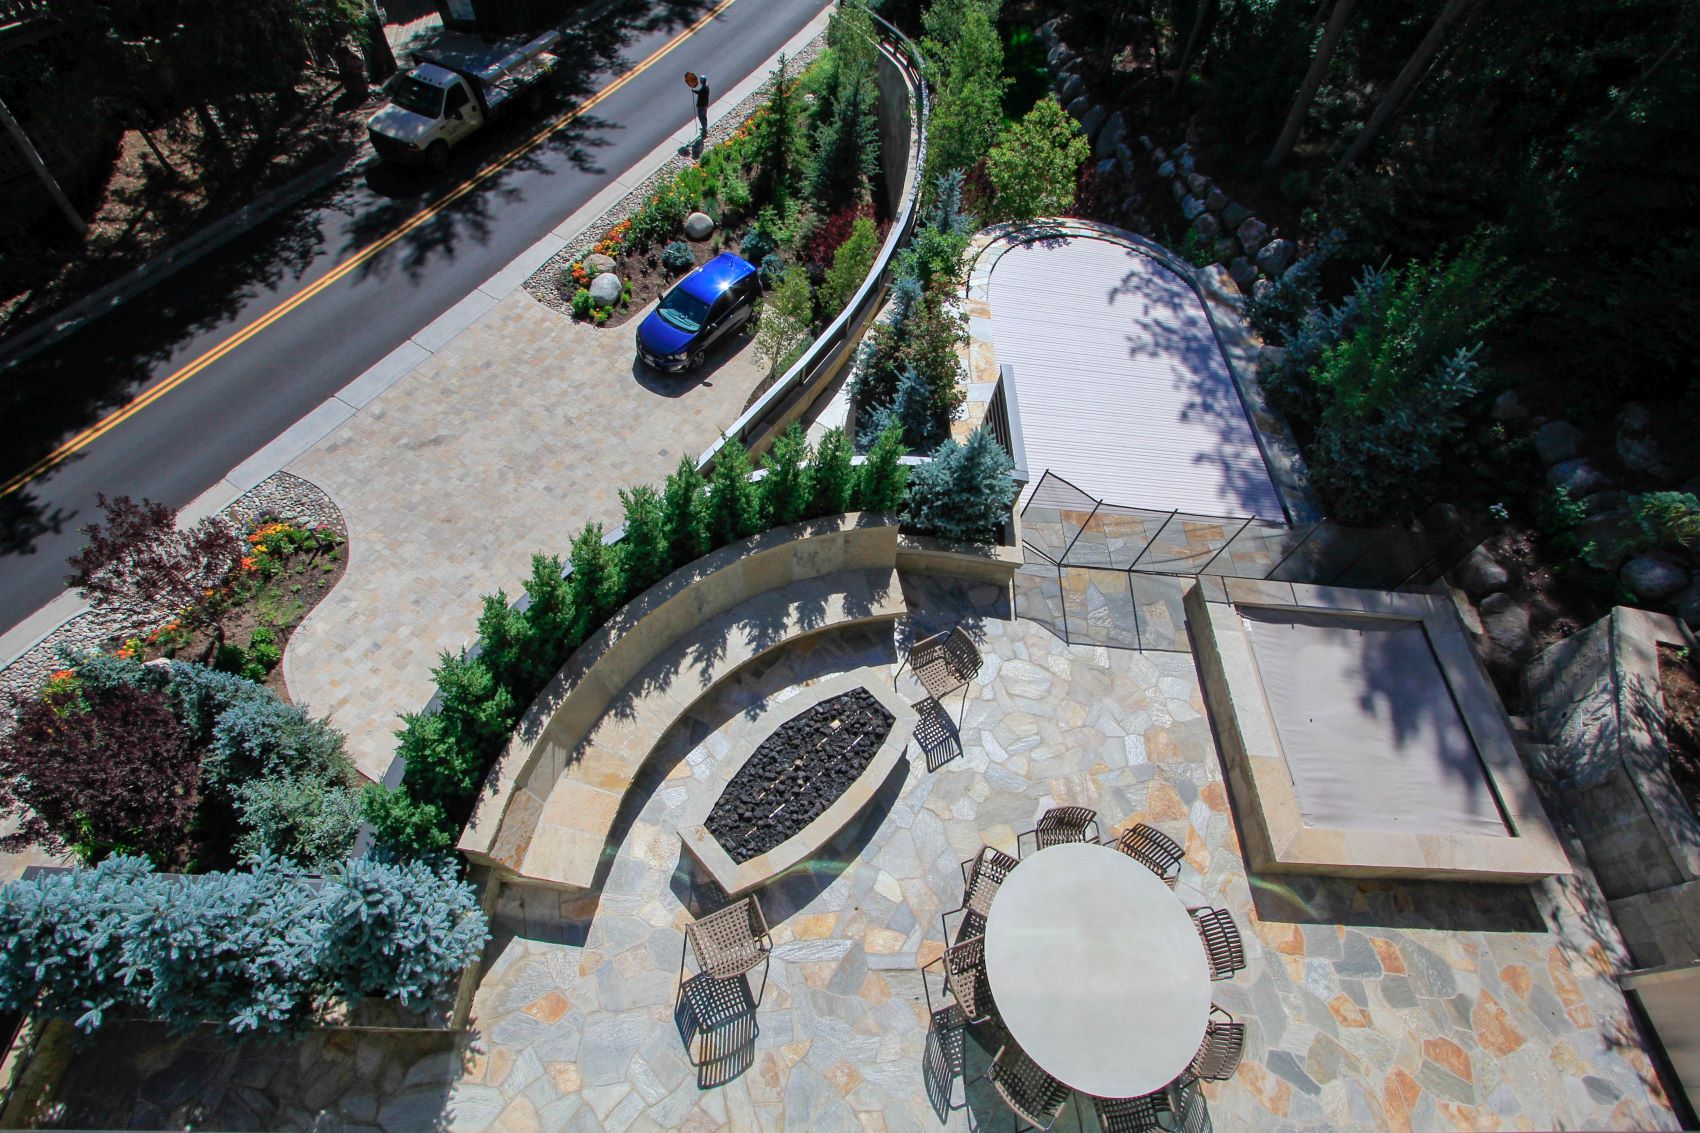 This aerial image shows a well-landscaped outdoor area with a fire pit, seating, paved surfaces, and a person walking along a nearby road.